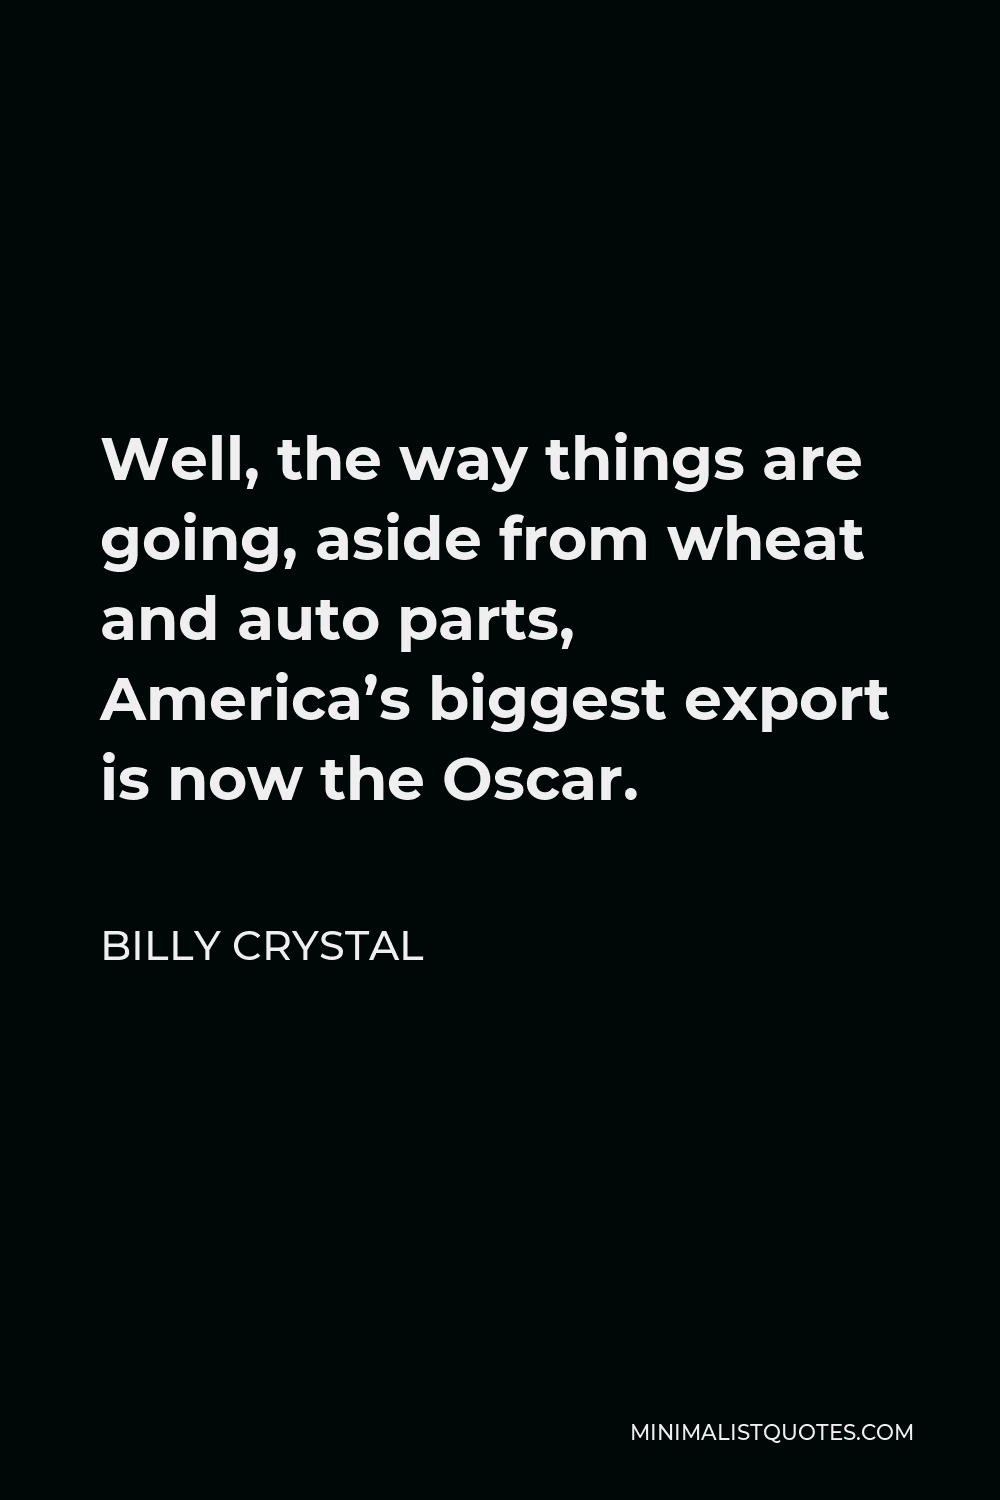 Billy Crystal Quote - Well, the way things are going, aside from wheat and auto parts, America’s biggest export is now the Oscar.